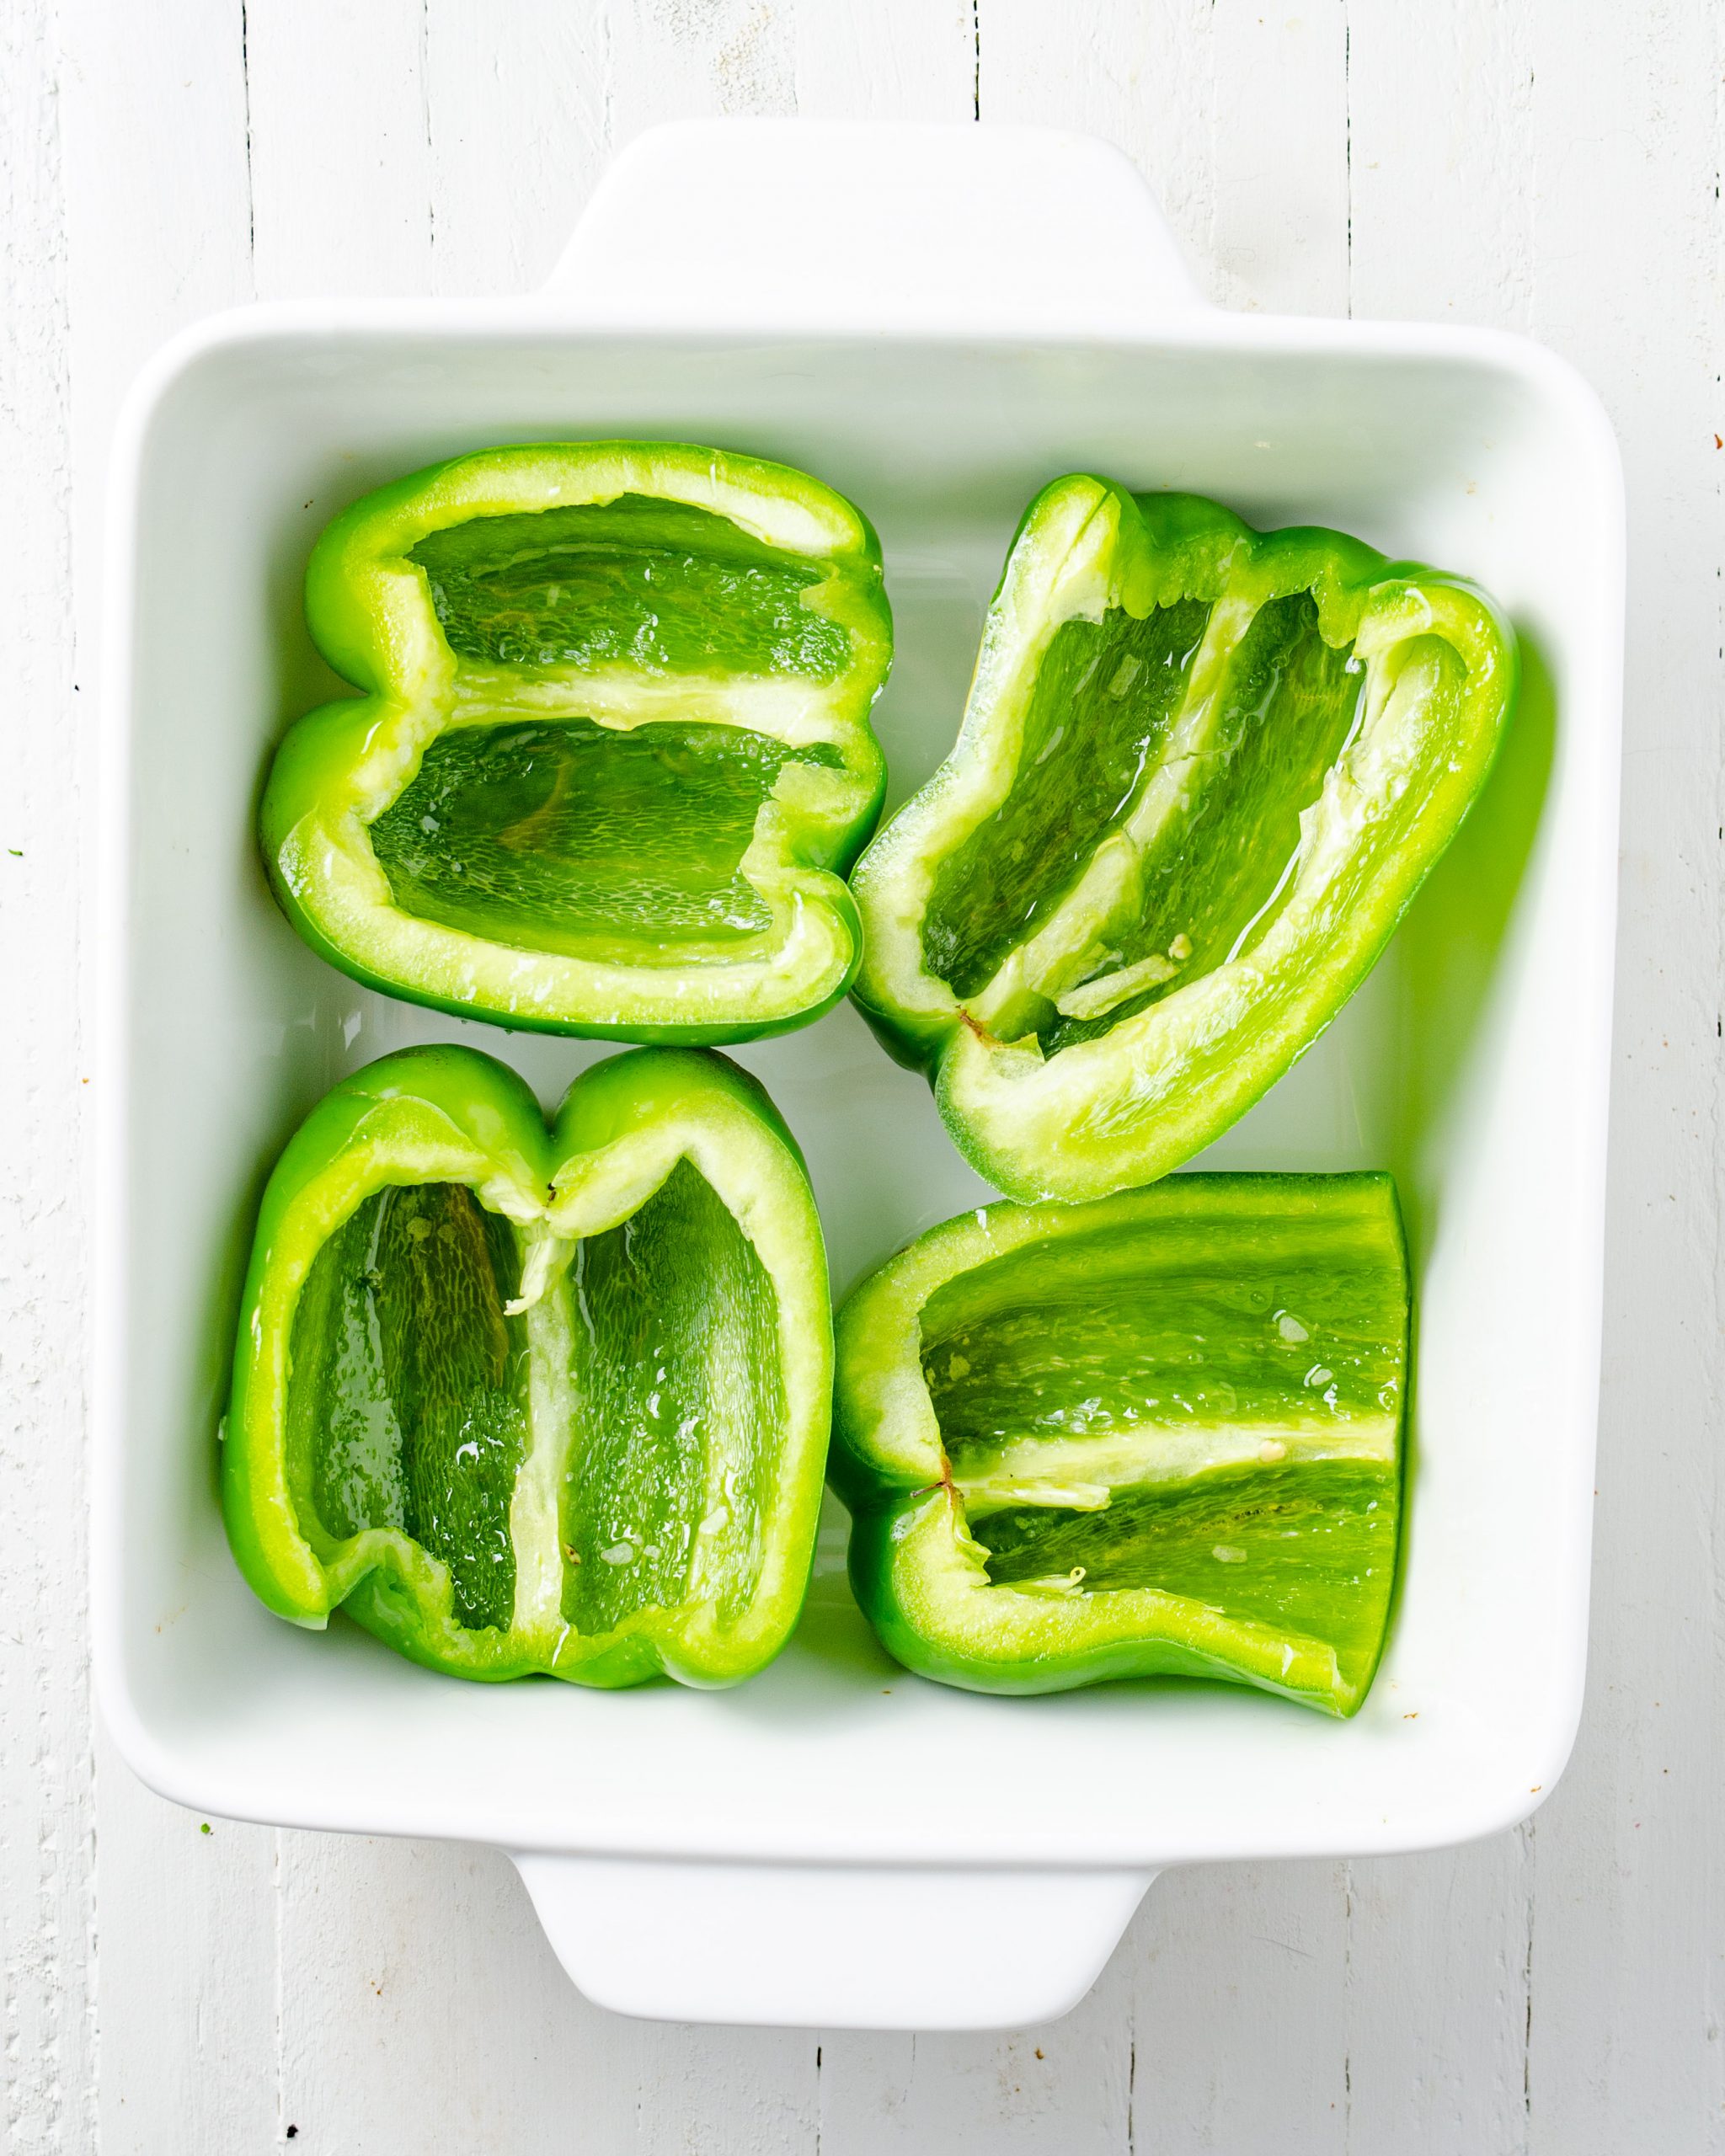 Place the cut green peppers into a 9x13 baking dish, and drizzle with 1 Tbsp of olive oil. 